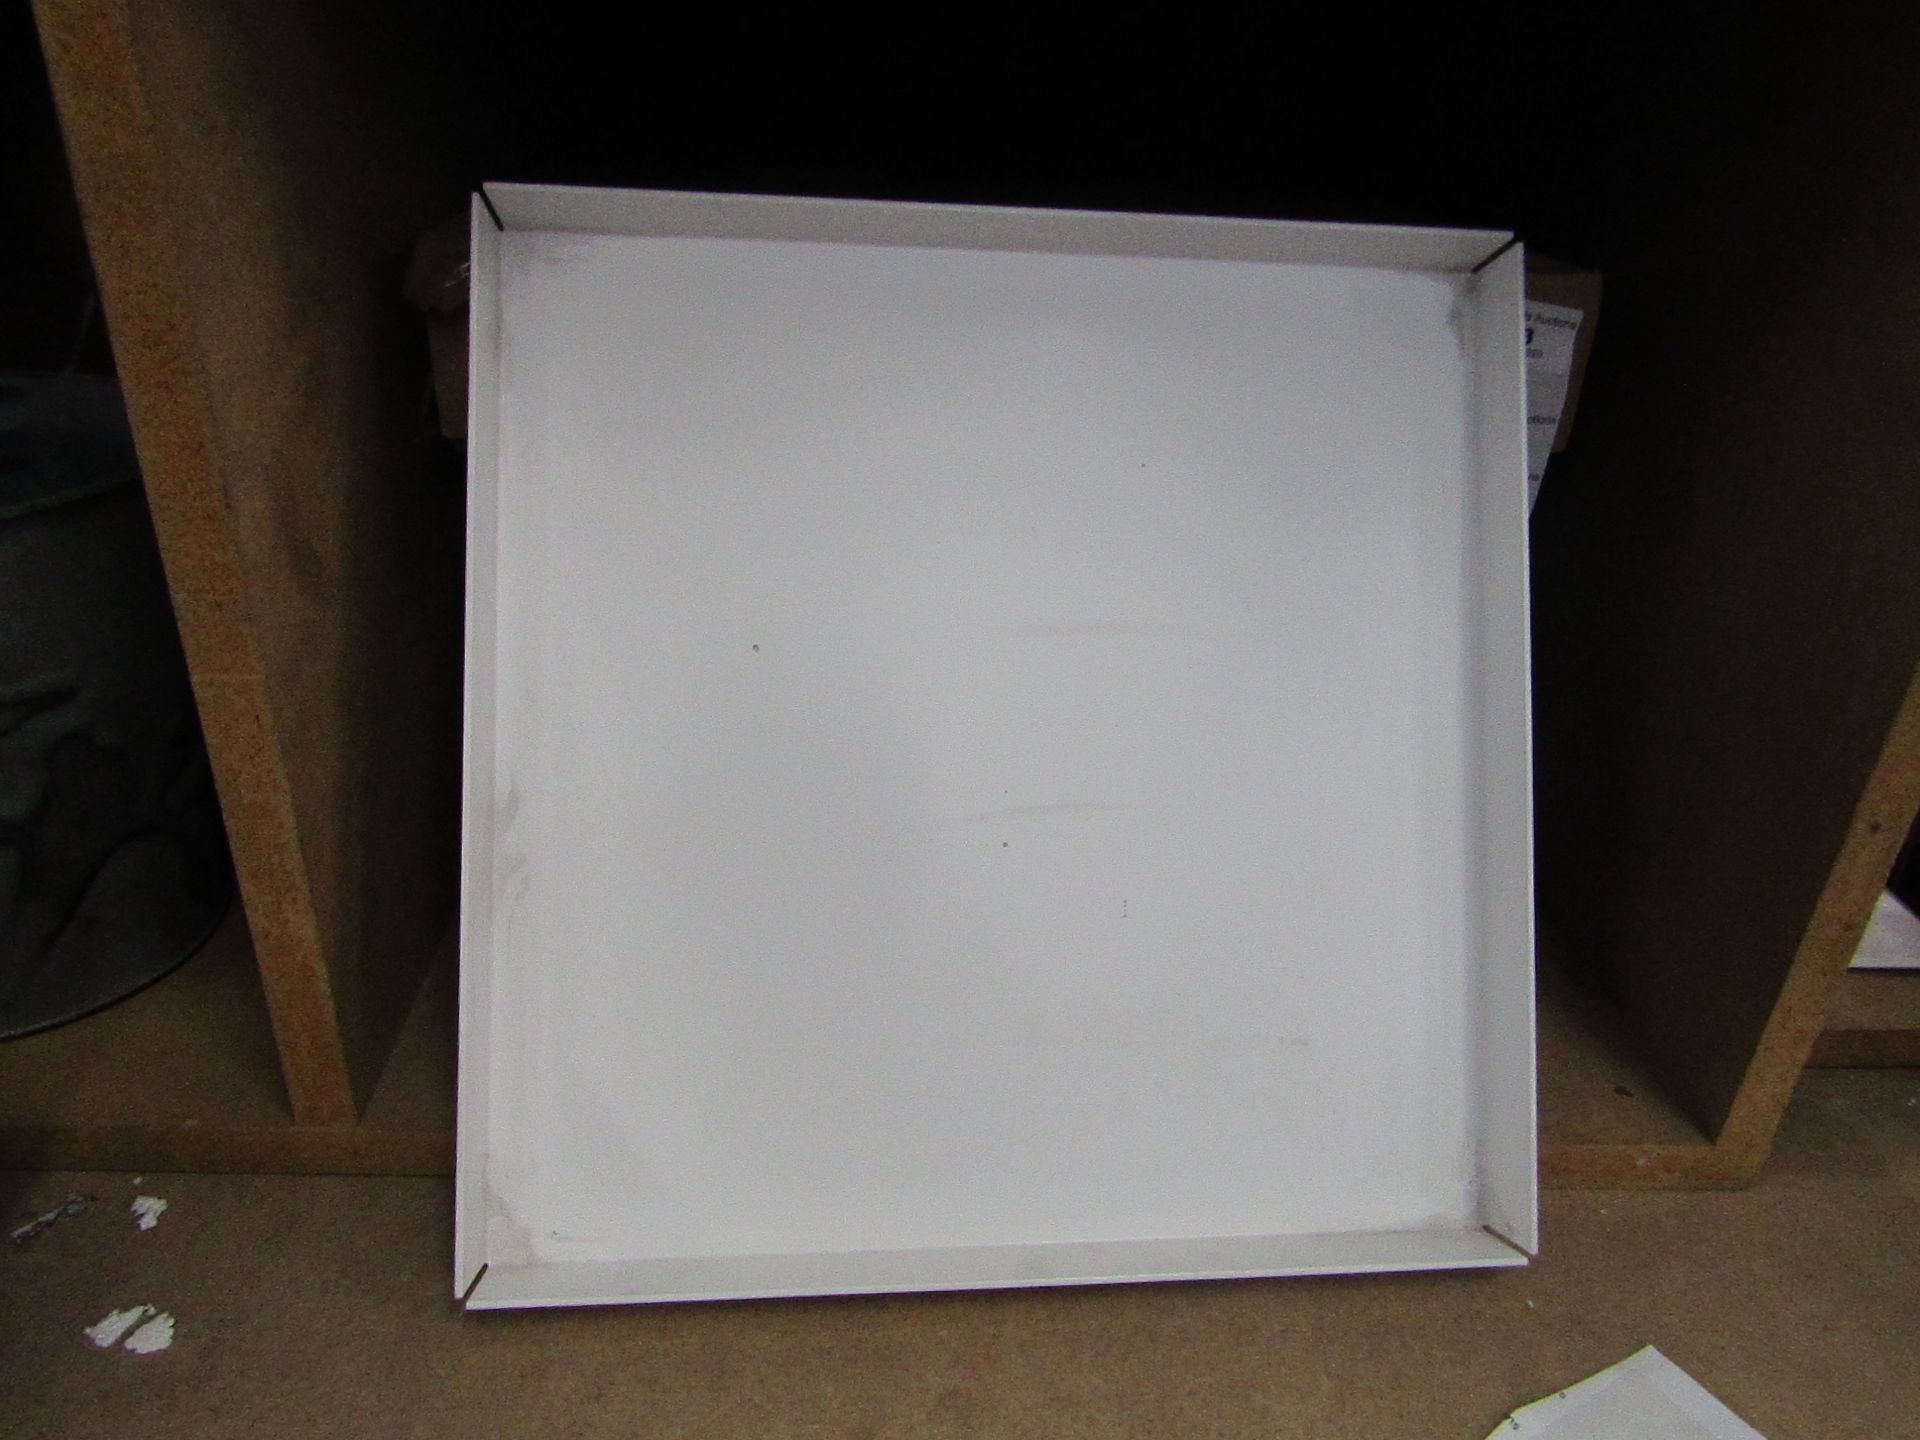 | 1X | SQUARE ALUMINIUM TRAY IN SIGNAL WHITE 31 X 31 CM - MORE INFO AT HTTPS://WWW.NEST.CO.UK/